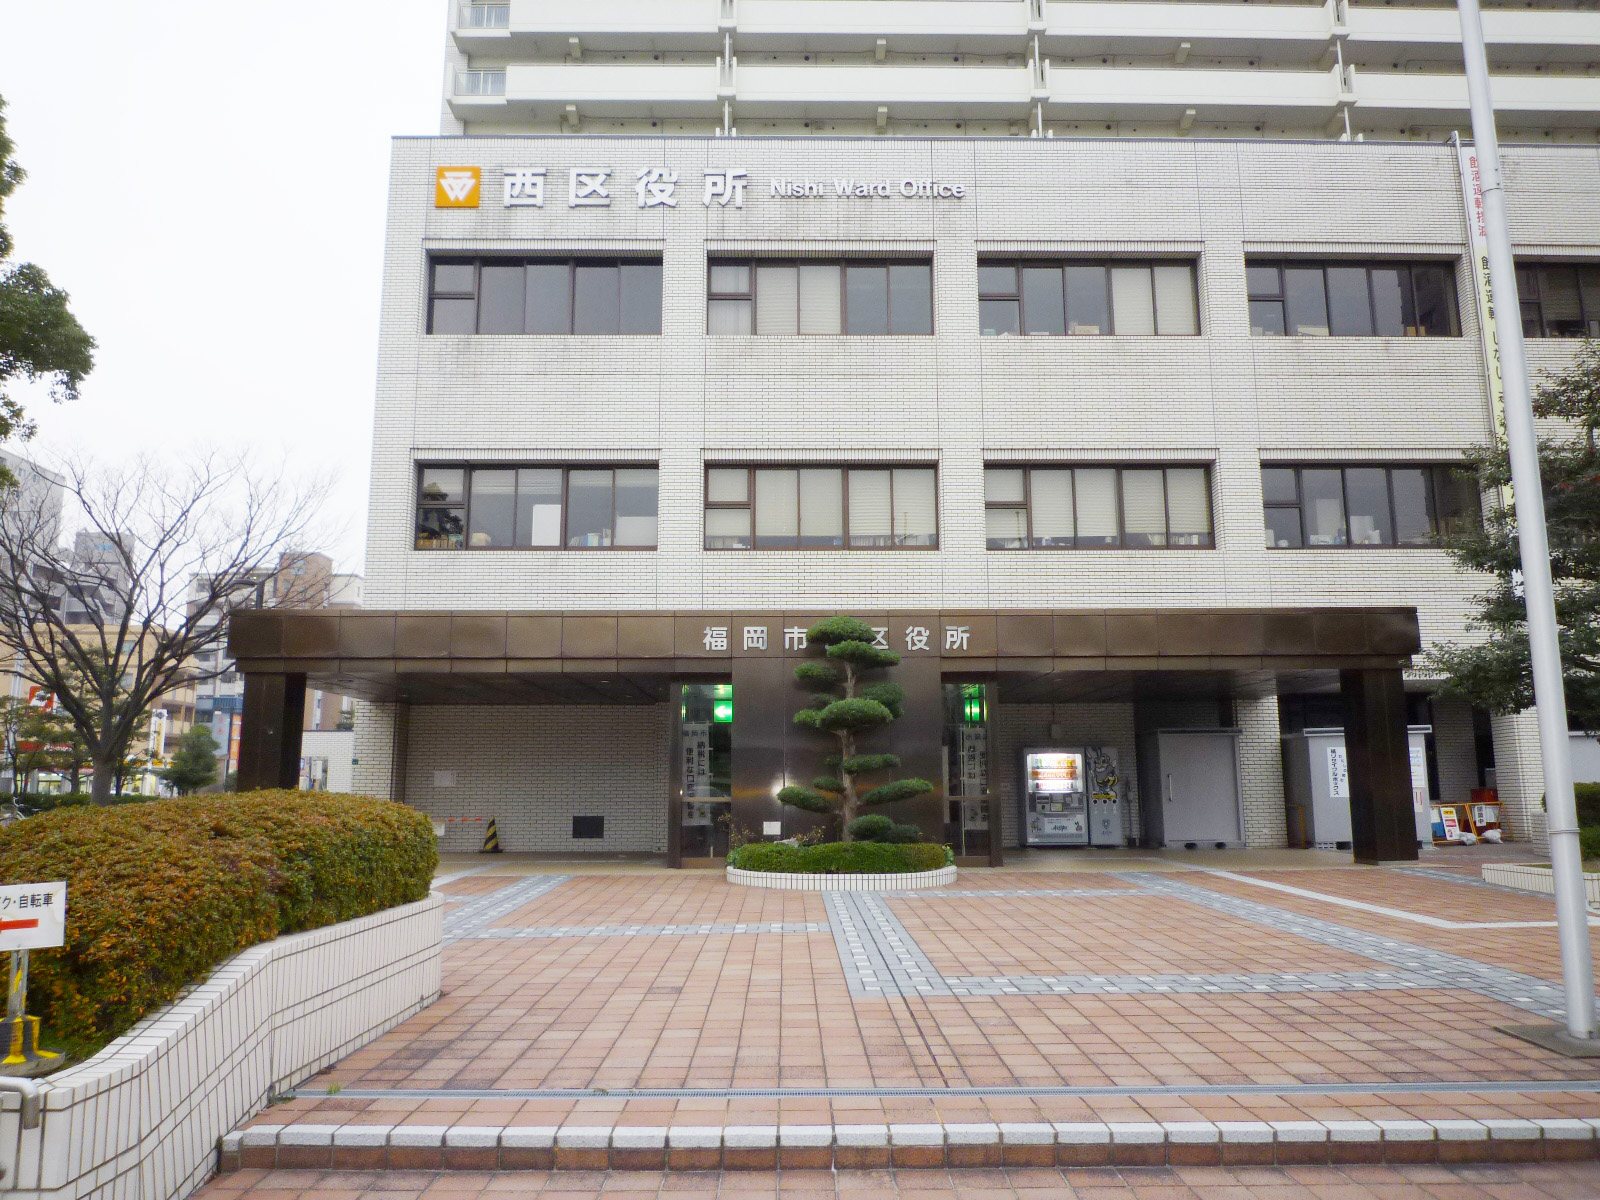 Government office. 955m to Fukuoka West Ward (government office)